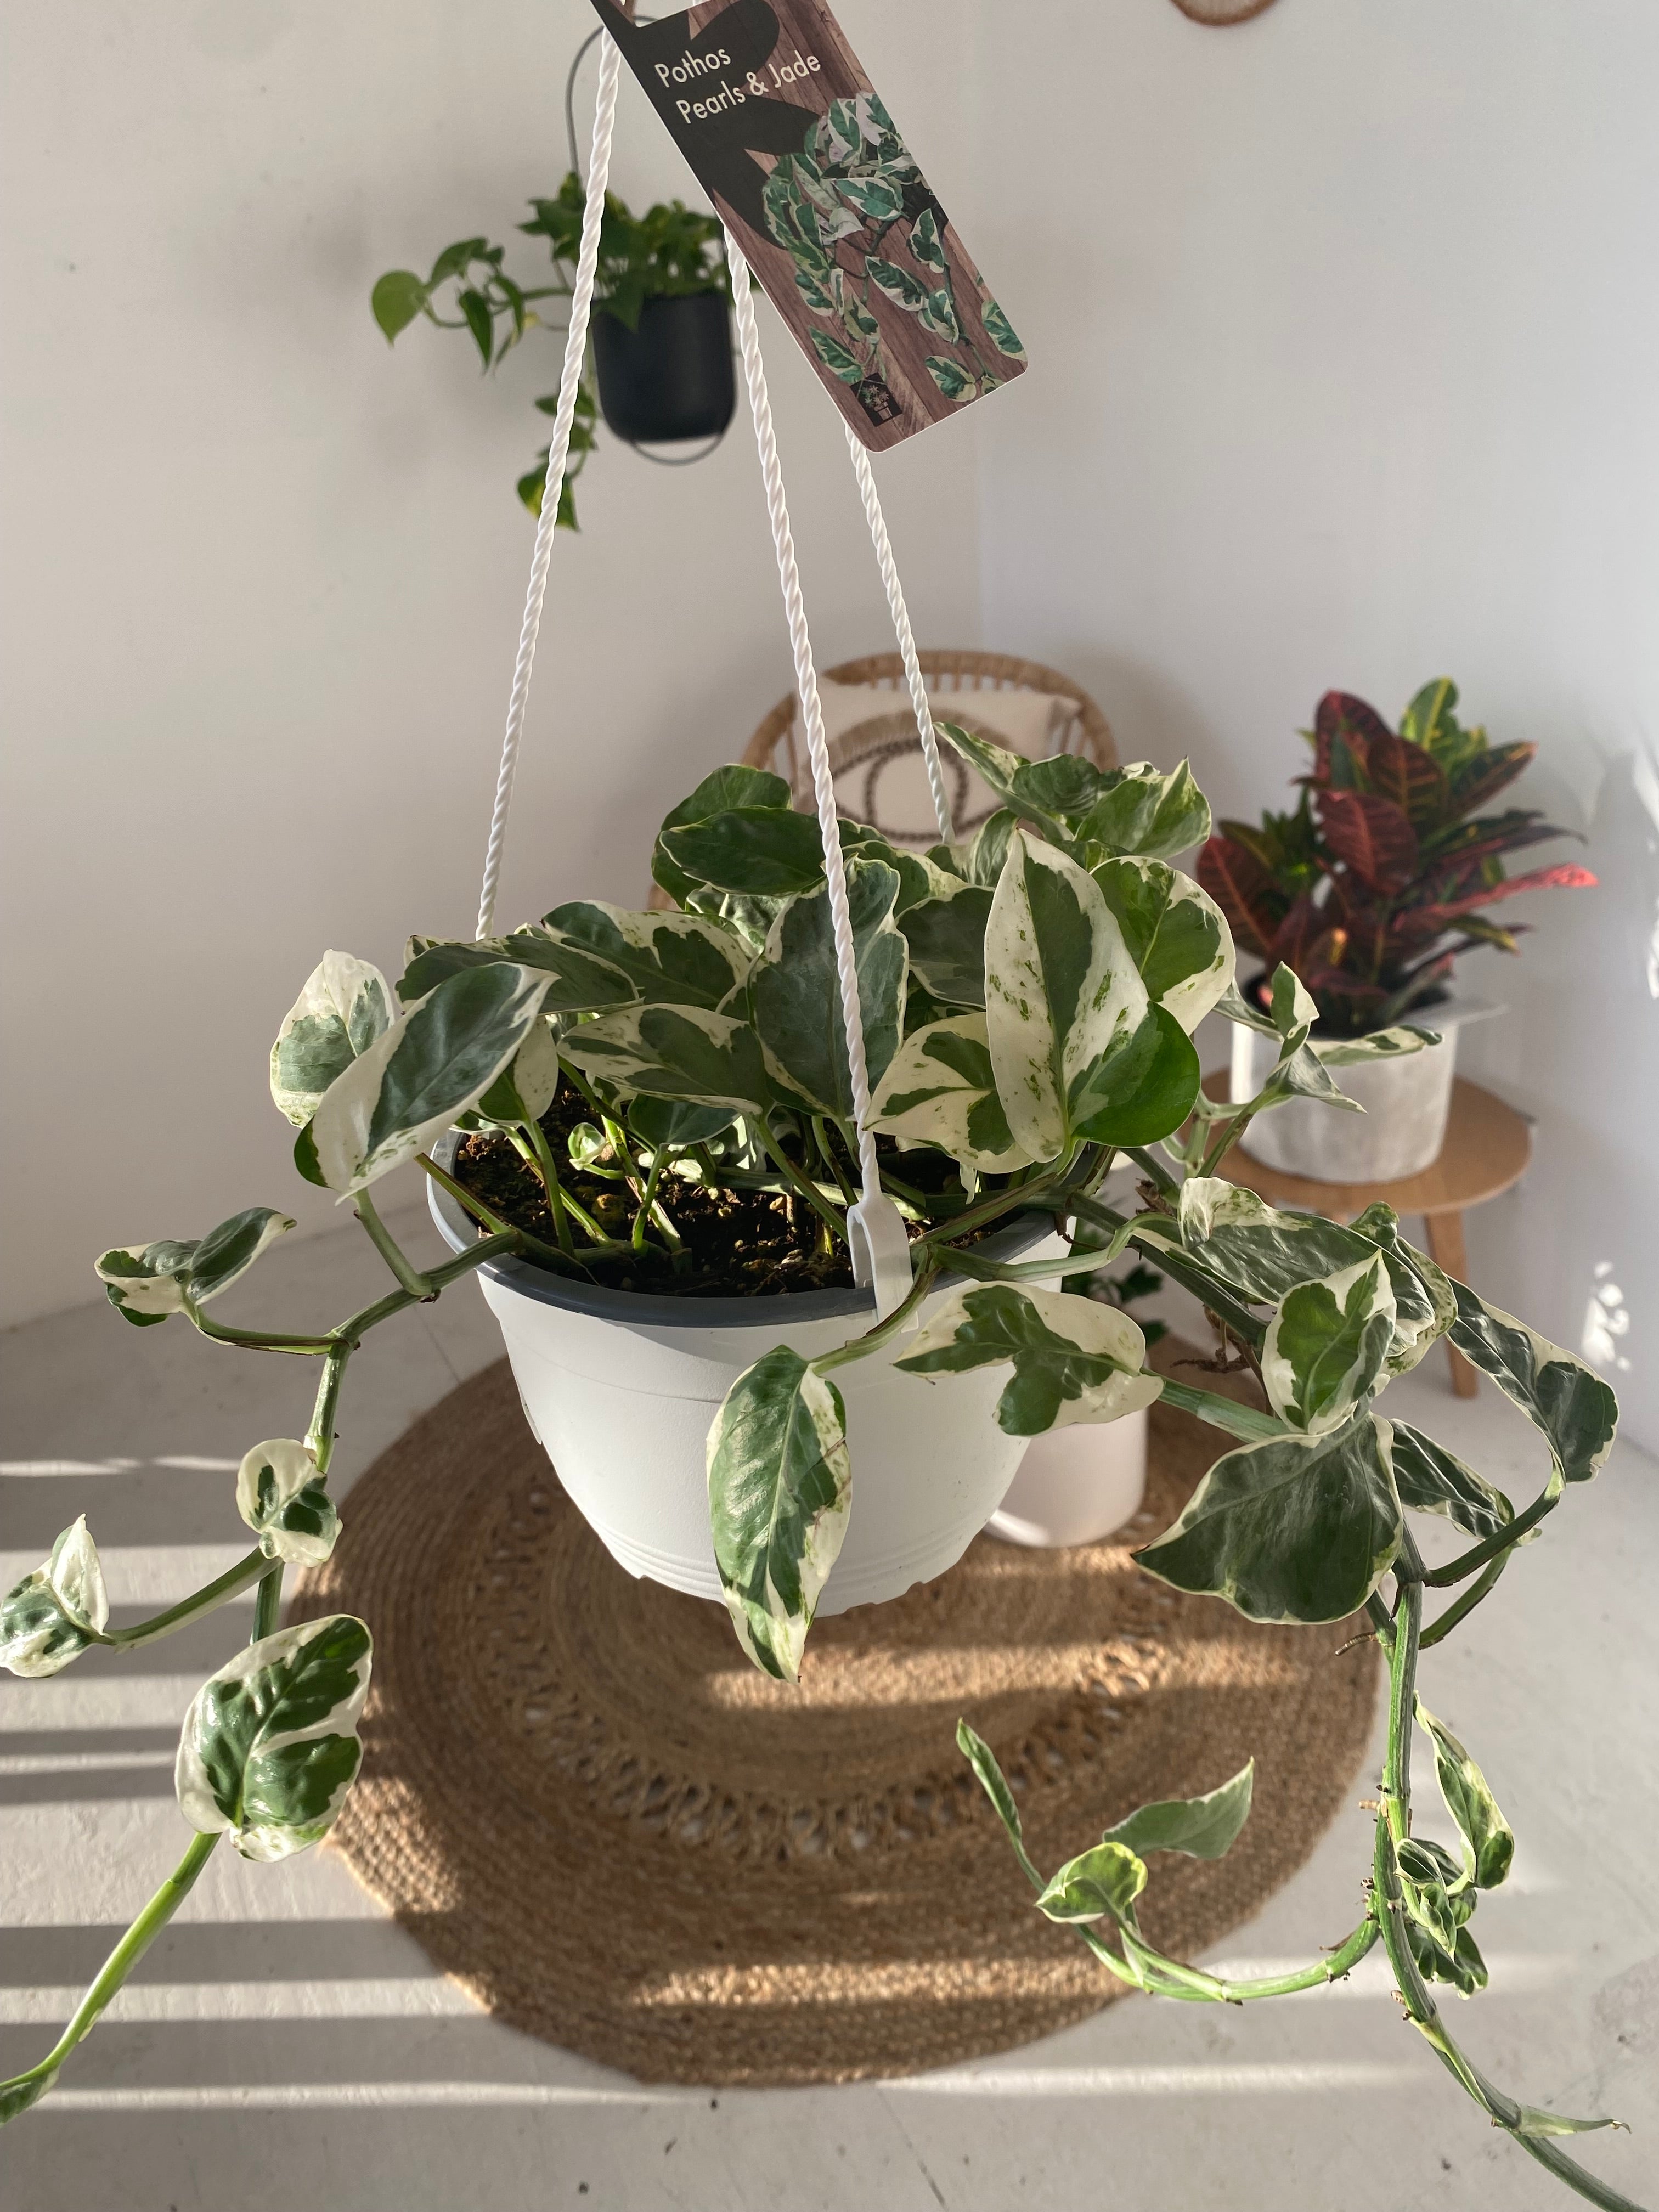 Facebook Marketplace - 7" Hanging Planter and Plant